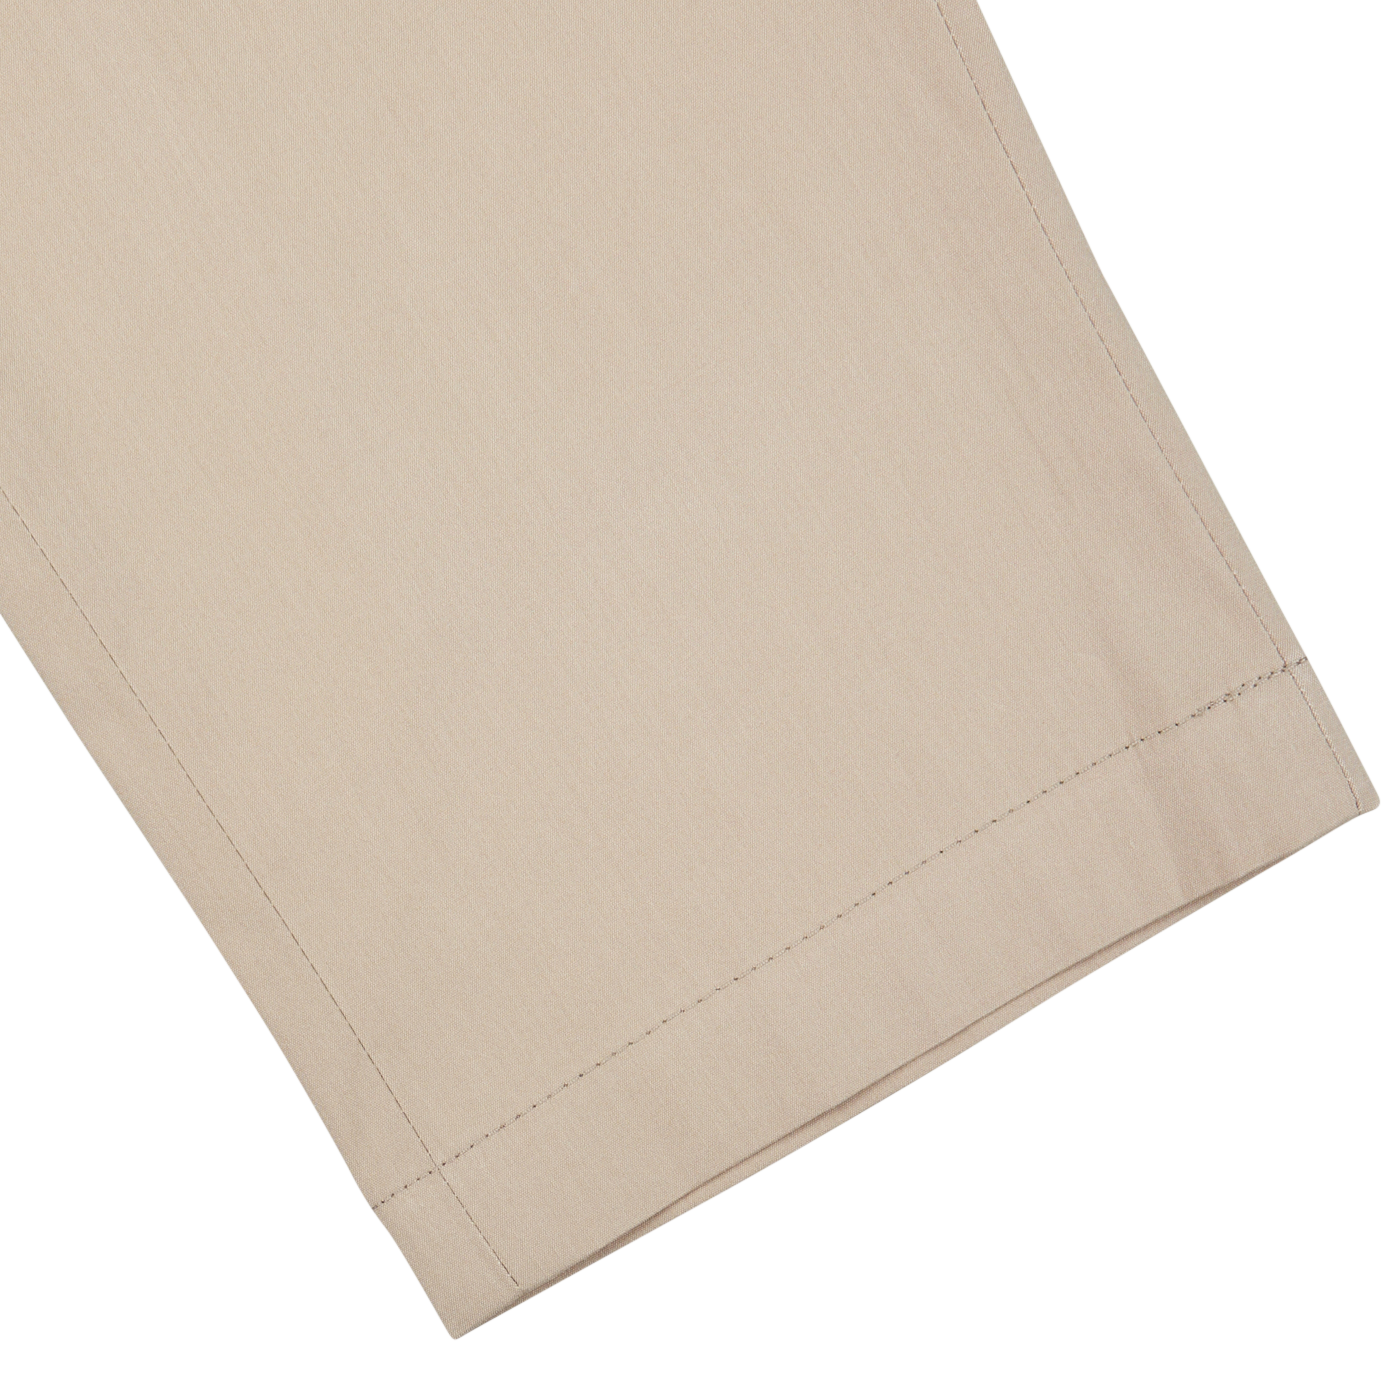 A Hiltl sand beige cotton nylon slim chinos with a sand beige cover on a white background.